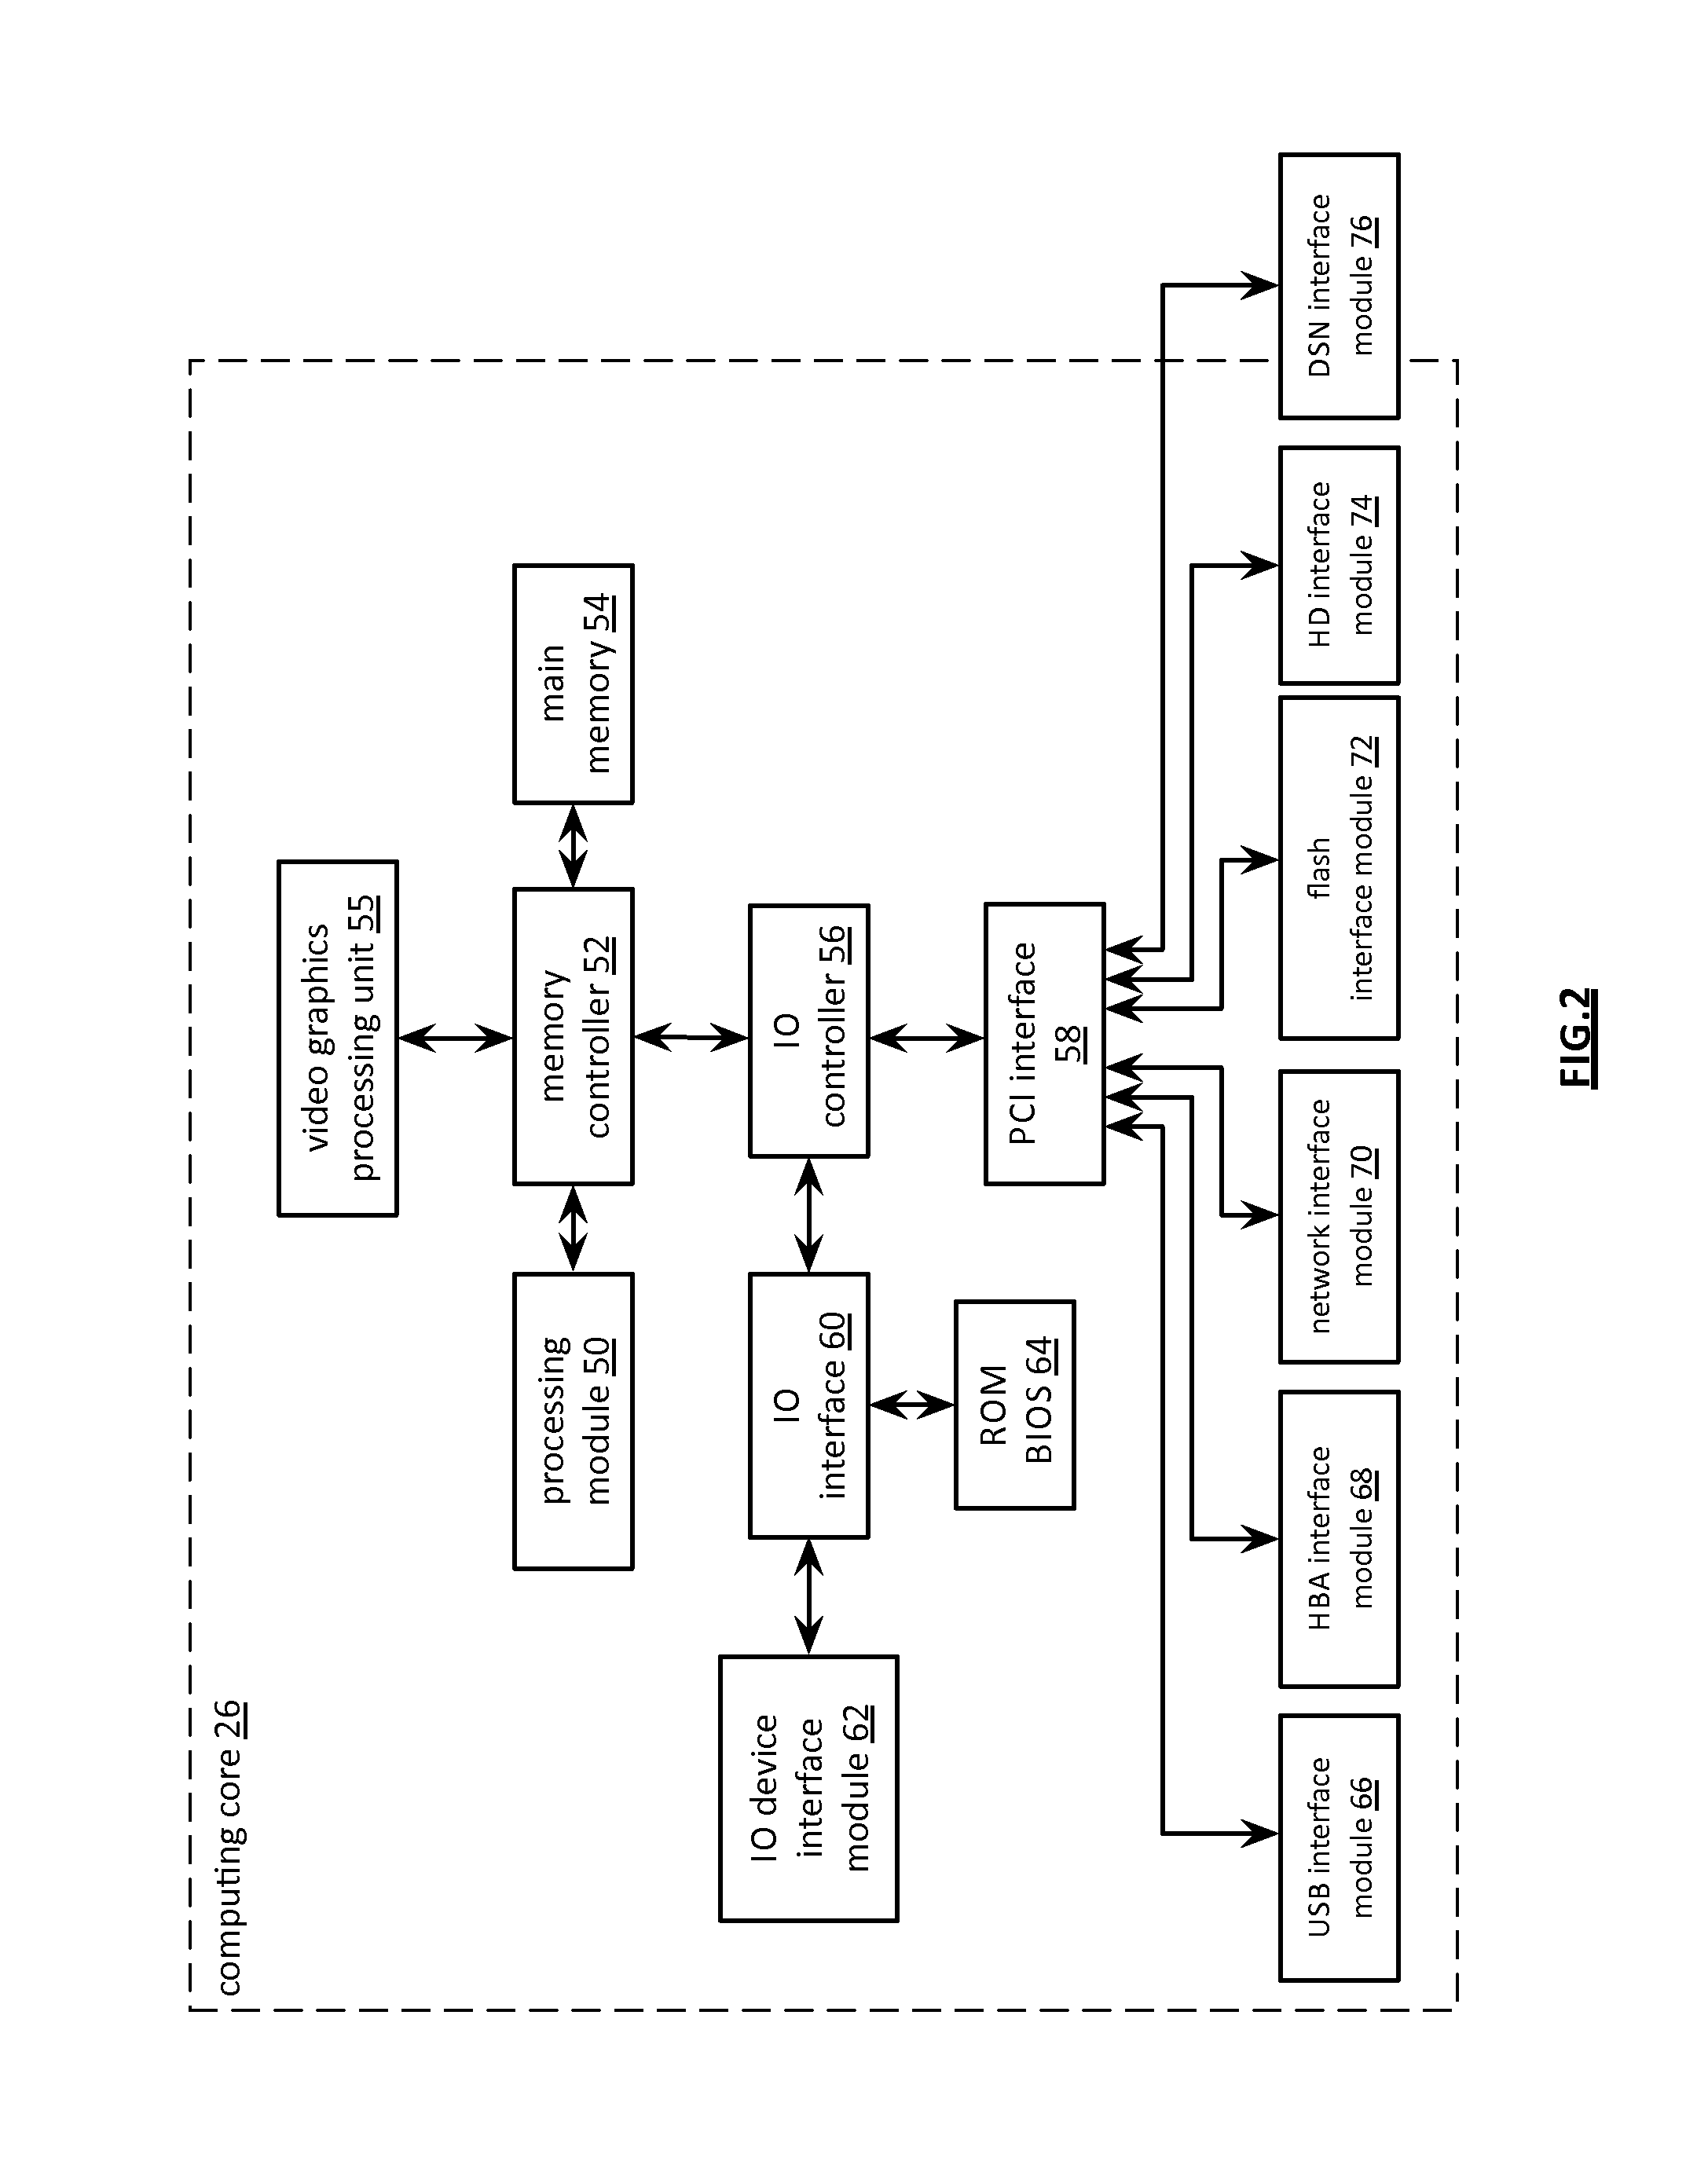 Processing a dispersed storage network access request utilizing certificate chain validation information